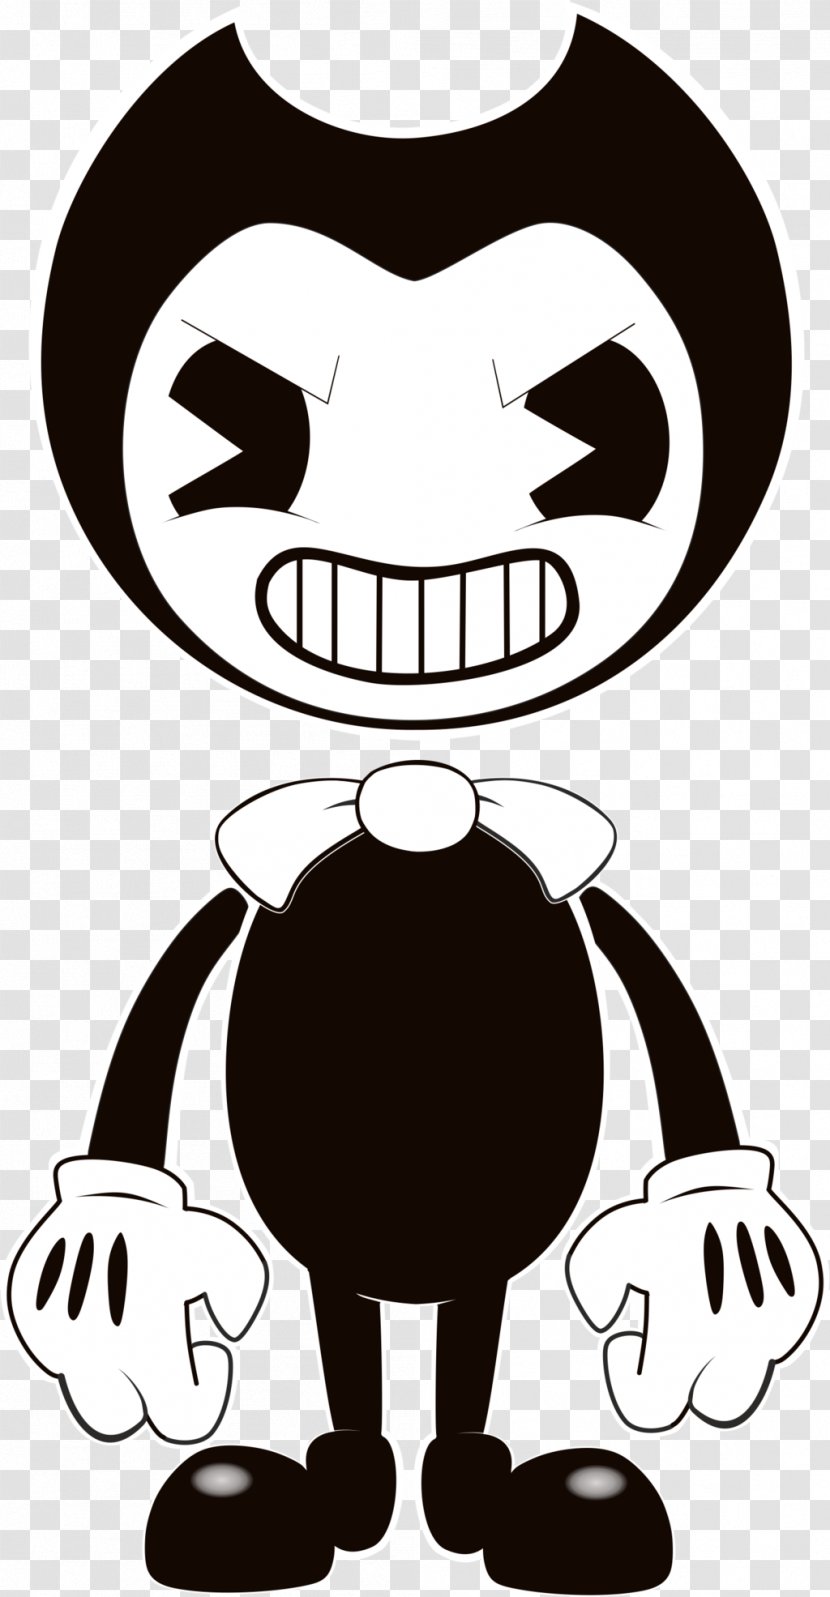 Bendy And The Ink Machine Song Video Game TheMeatly Games Survival Horror - Themeatly - Coming Soon Transparent PNG